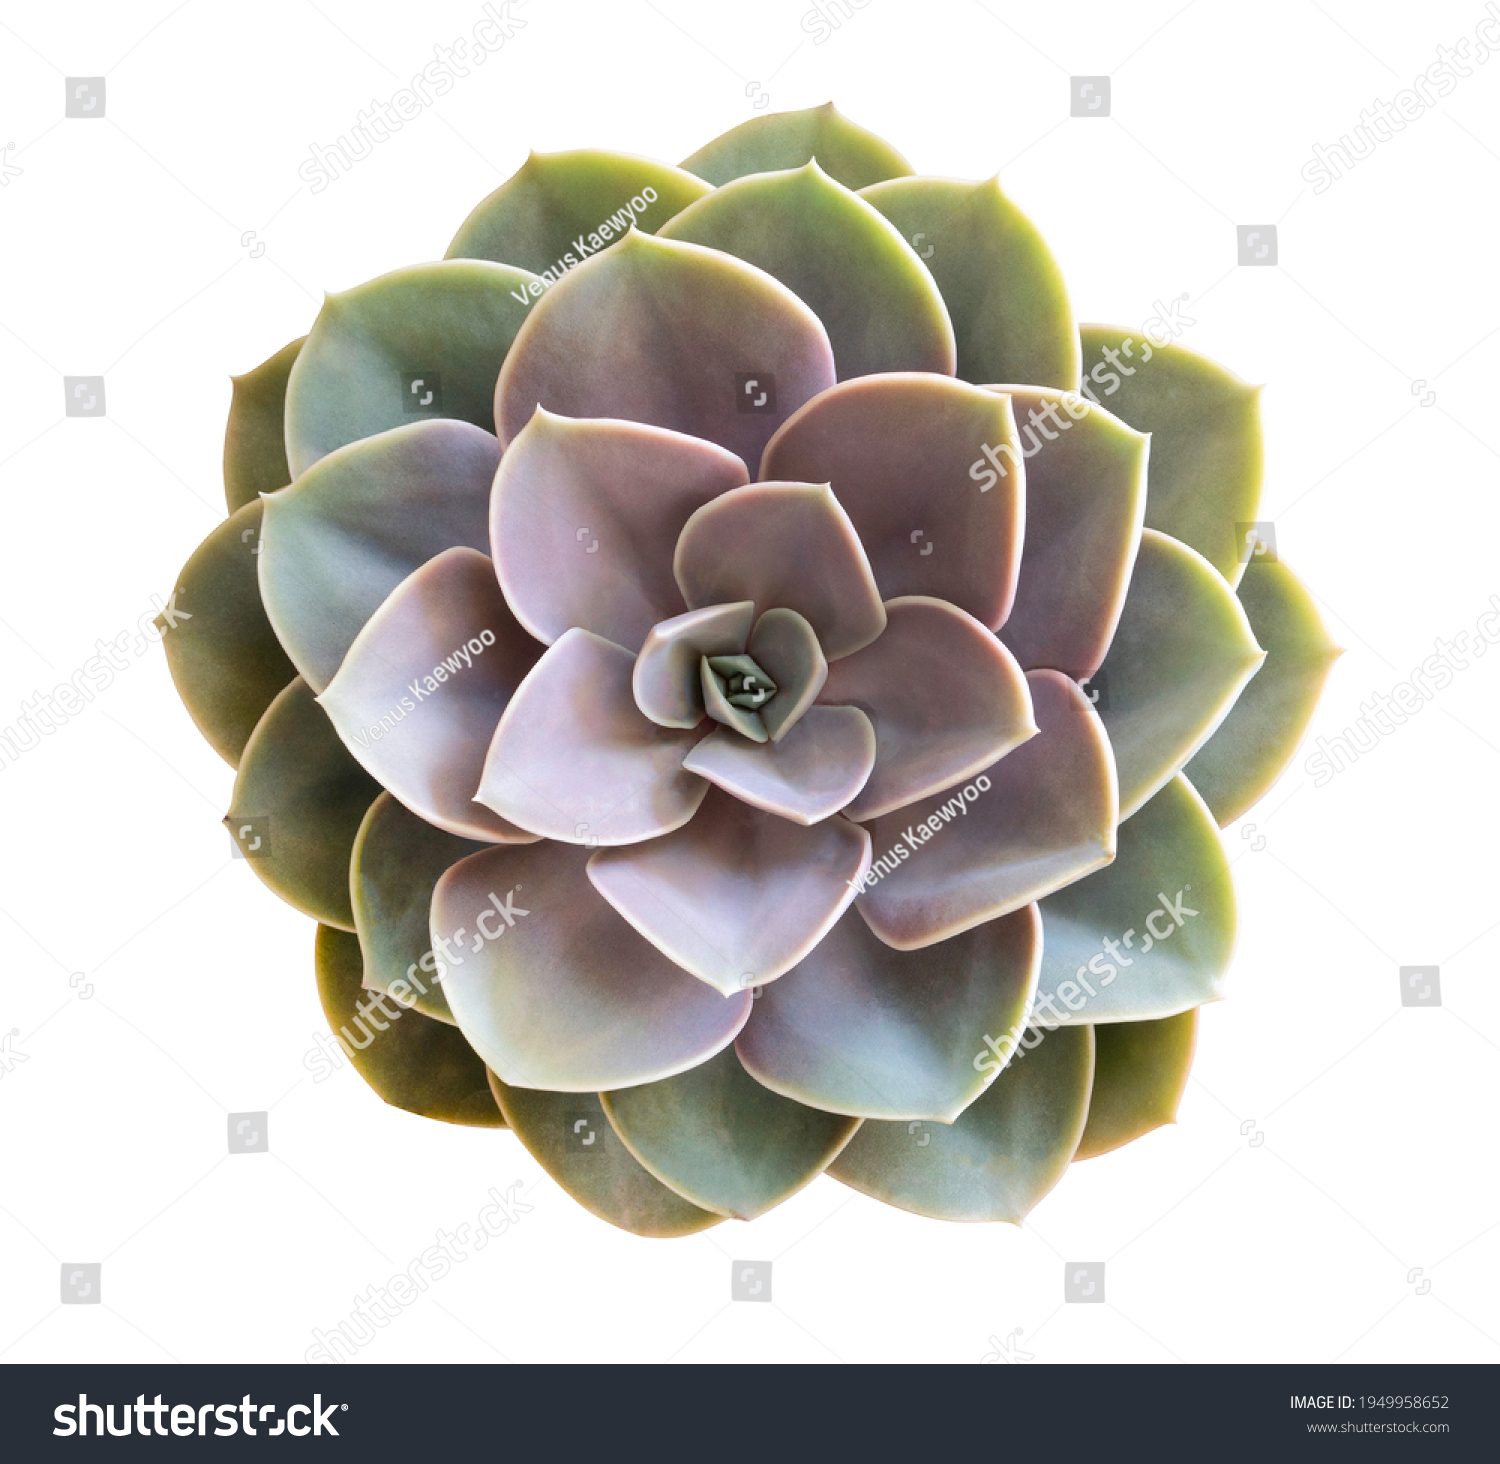 Succulent cactus flower tropical plant top view isolated on white background, clipping path included #1949958652